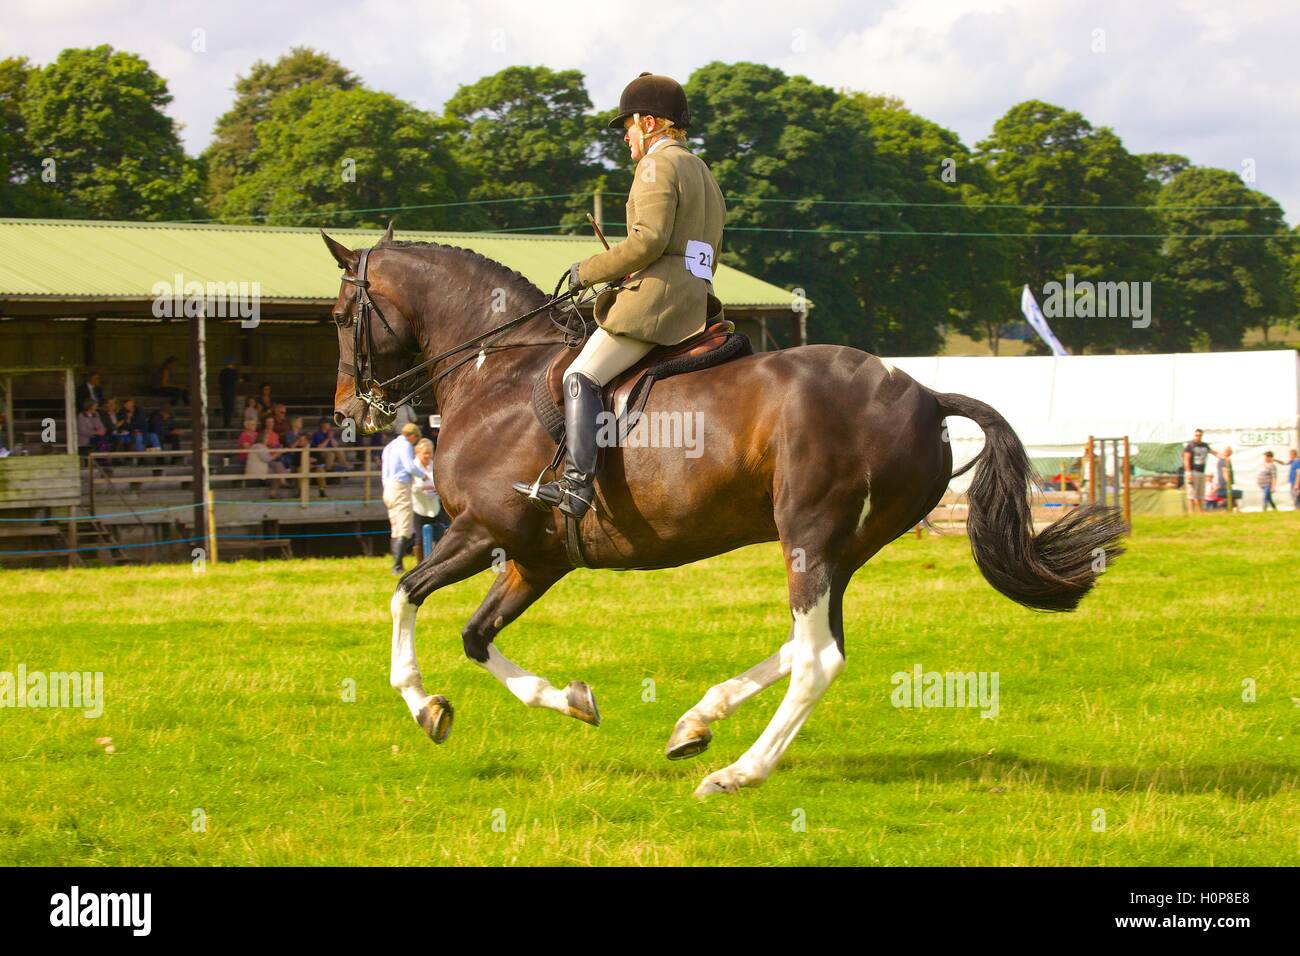 Man riding a horse show jumping. Bellingham Show and Country Festival, Bellingham, Northumberland, England, United Kingdom. Stock Photo